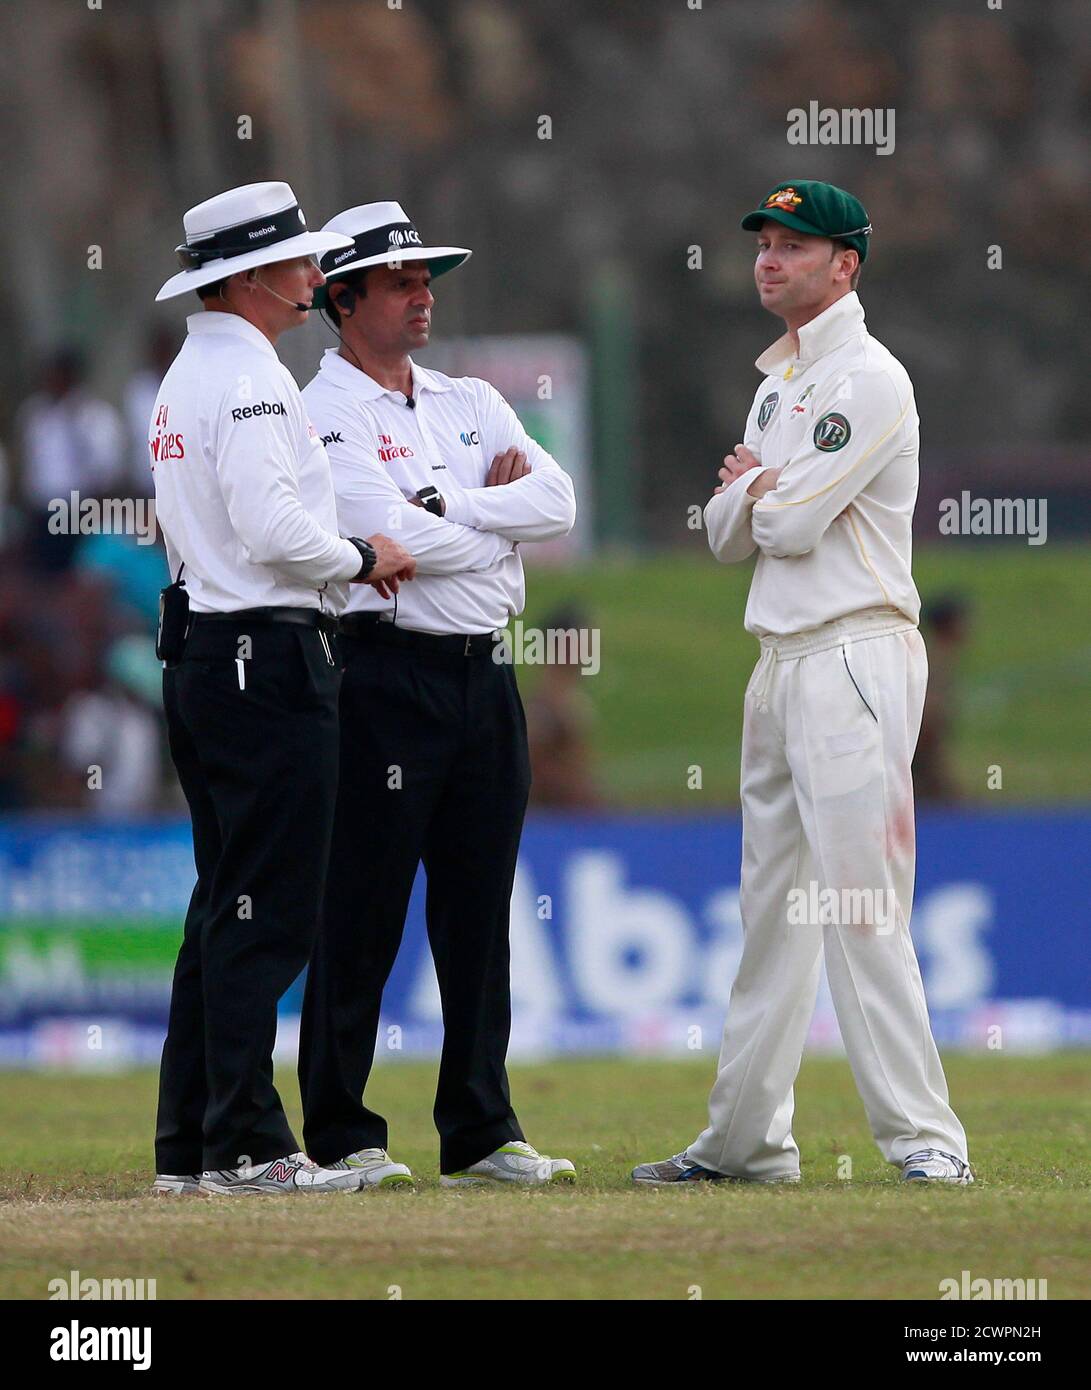 Australia's captain Michael Clarke (R) talks with umpires Aleem Dar and Richard Kettleborough as the players leave the field due to bad light during the third day of their first test cricket match in Galle September 2, 2011. REUTERS/Dinuka Liyanawatte (SRI LANKA - Tags: SPORT CRICKET) Stock Photo